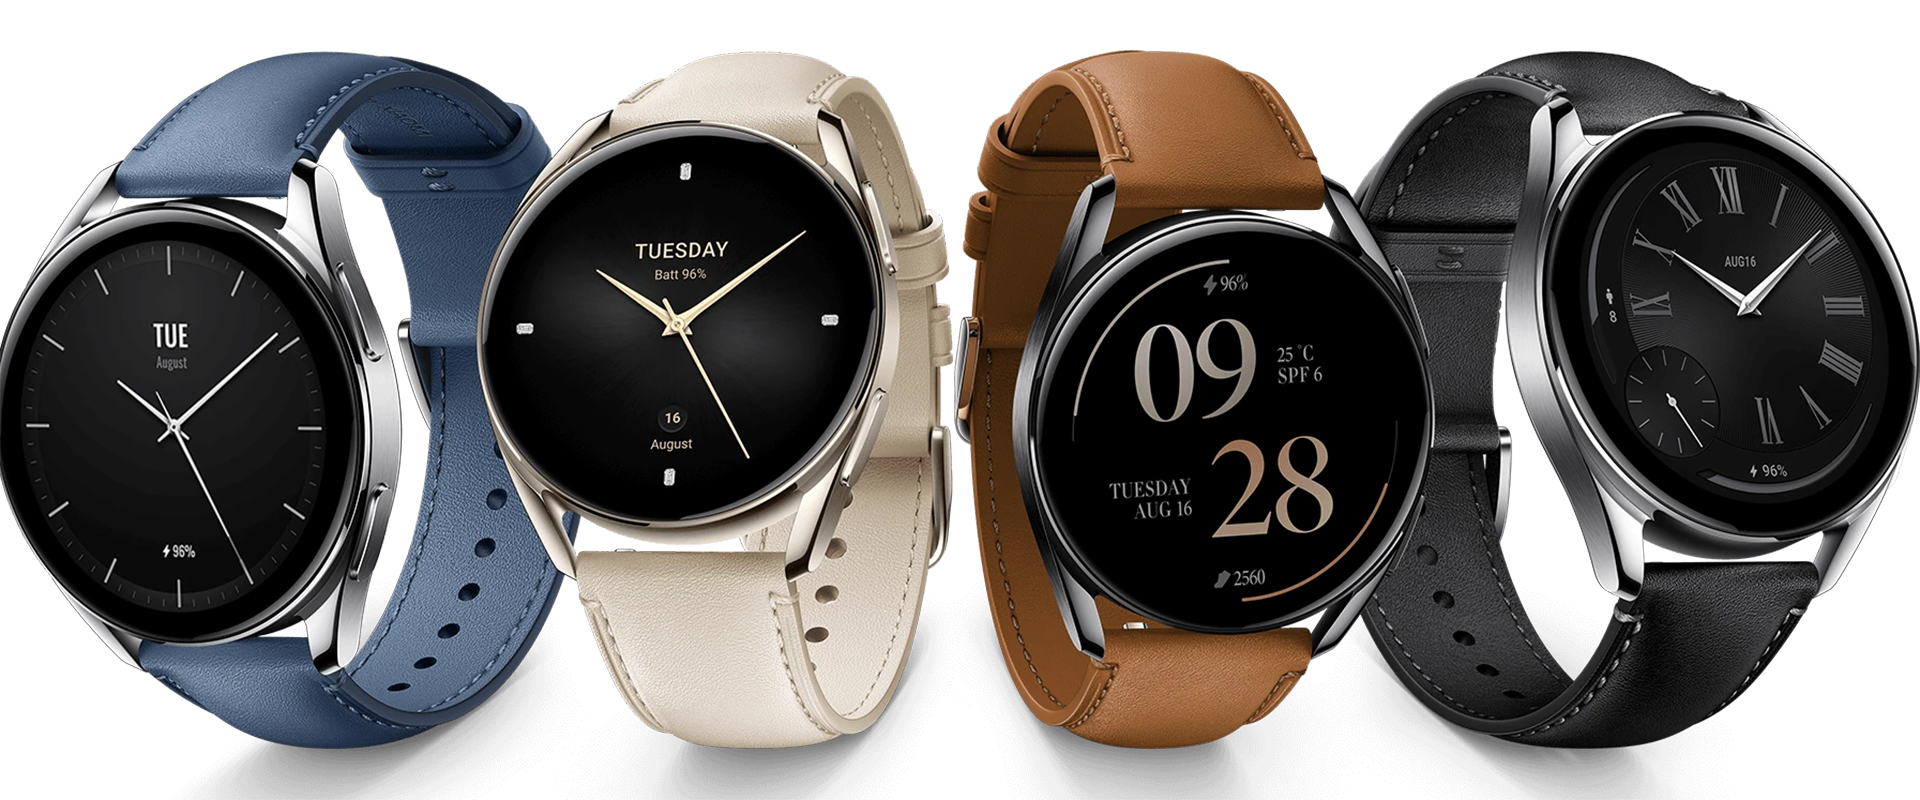 Xiaomi Watch S2 in different colors and leather strap